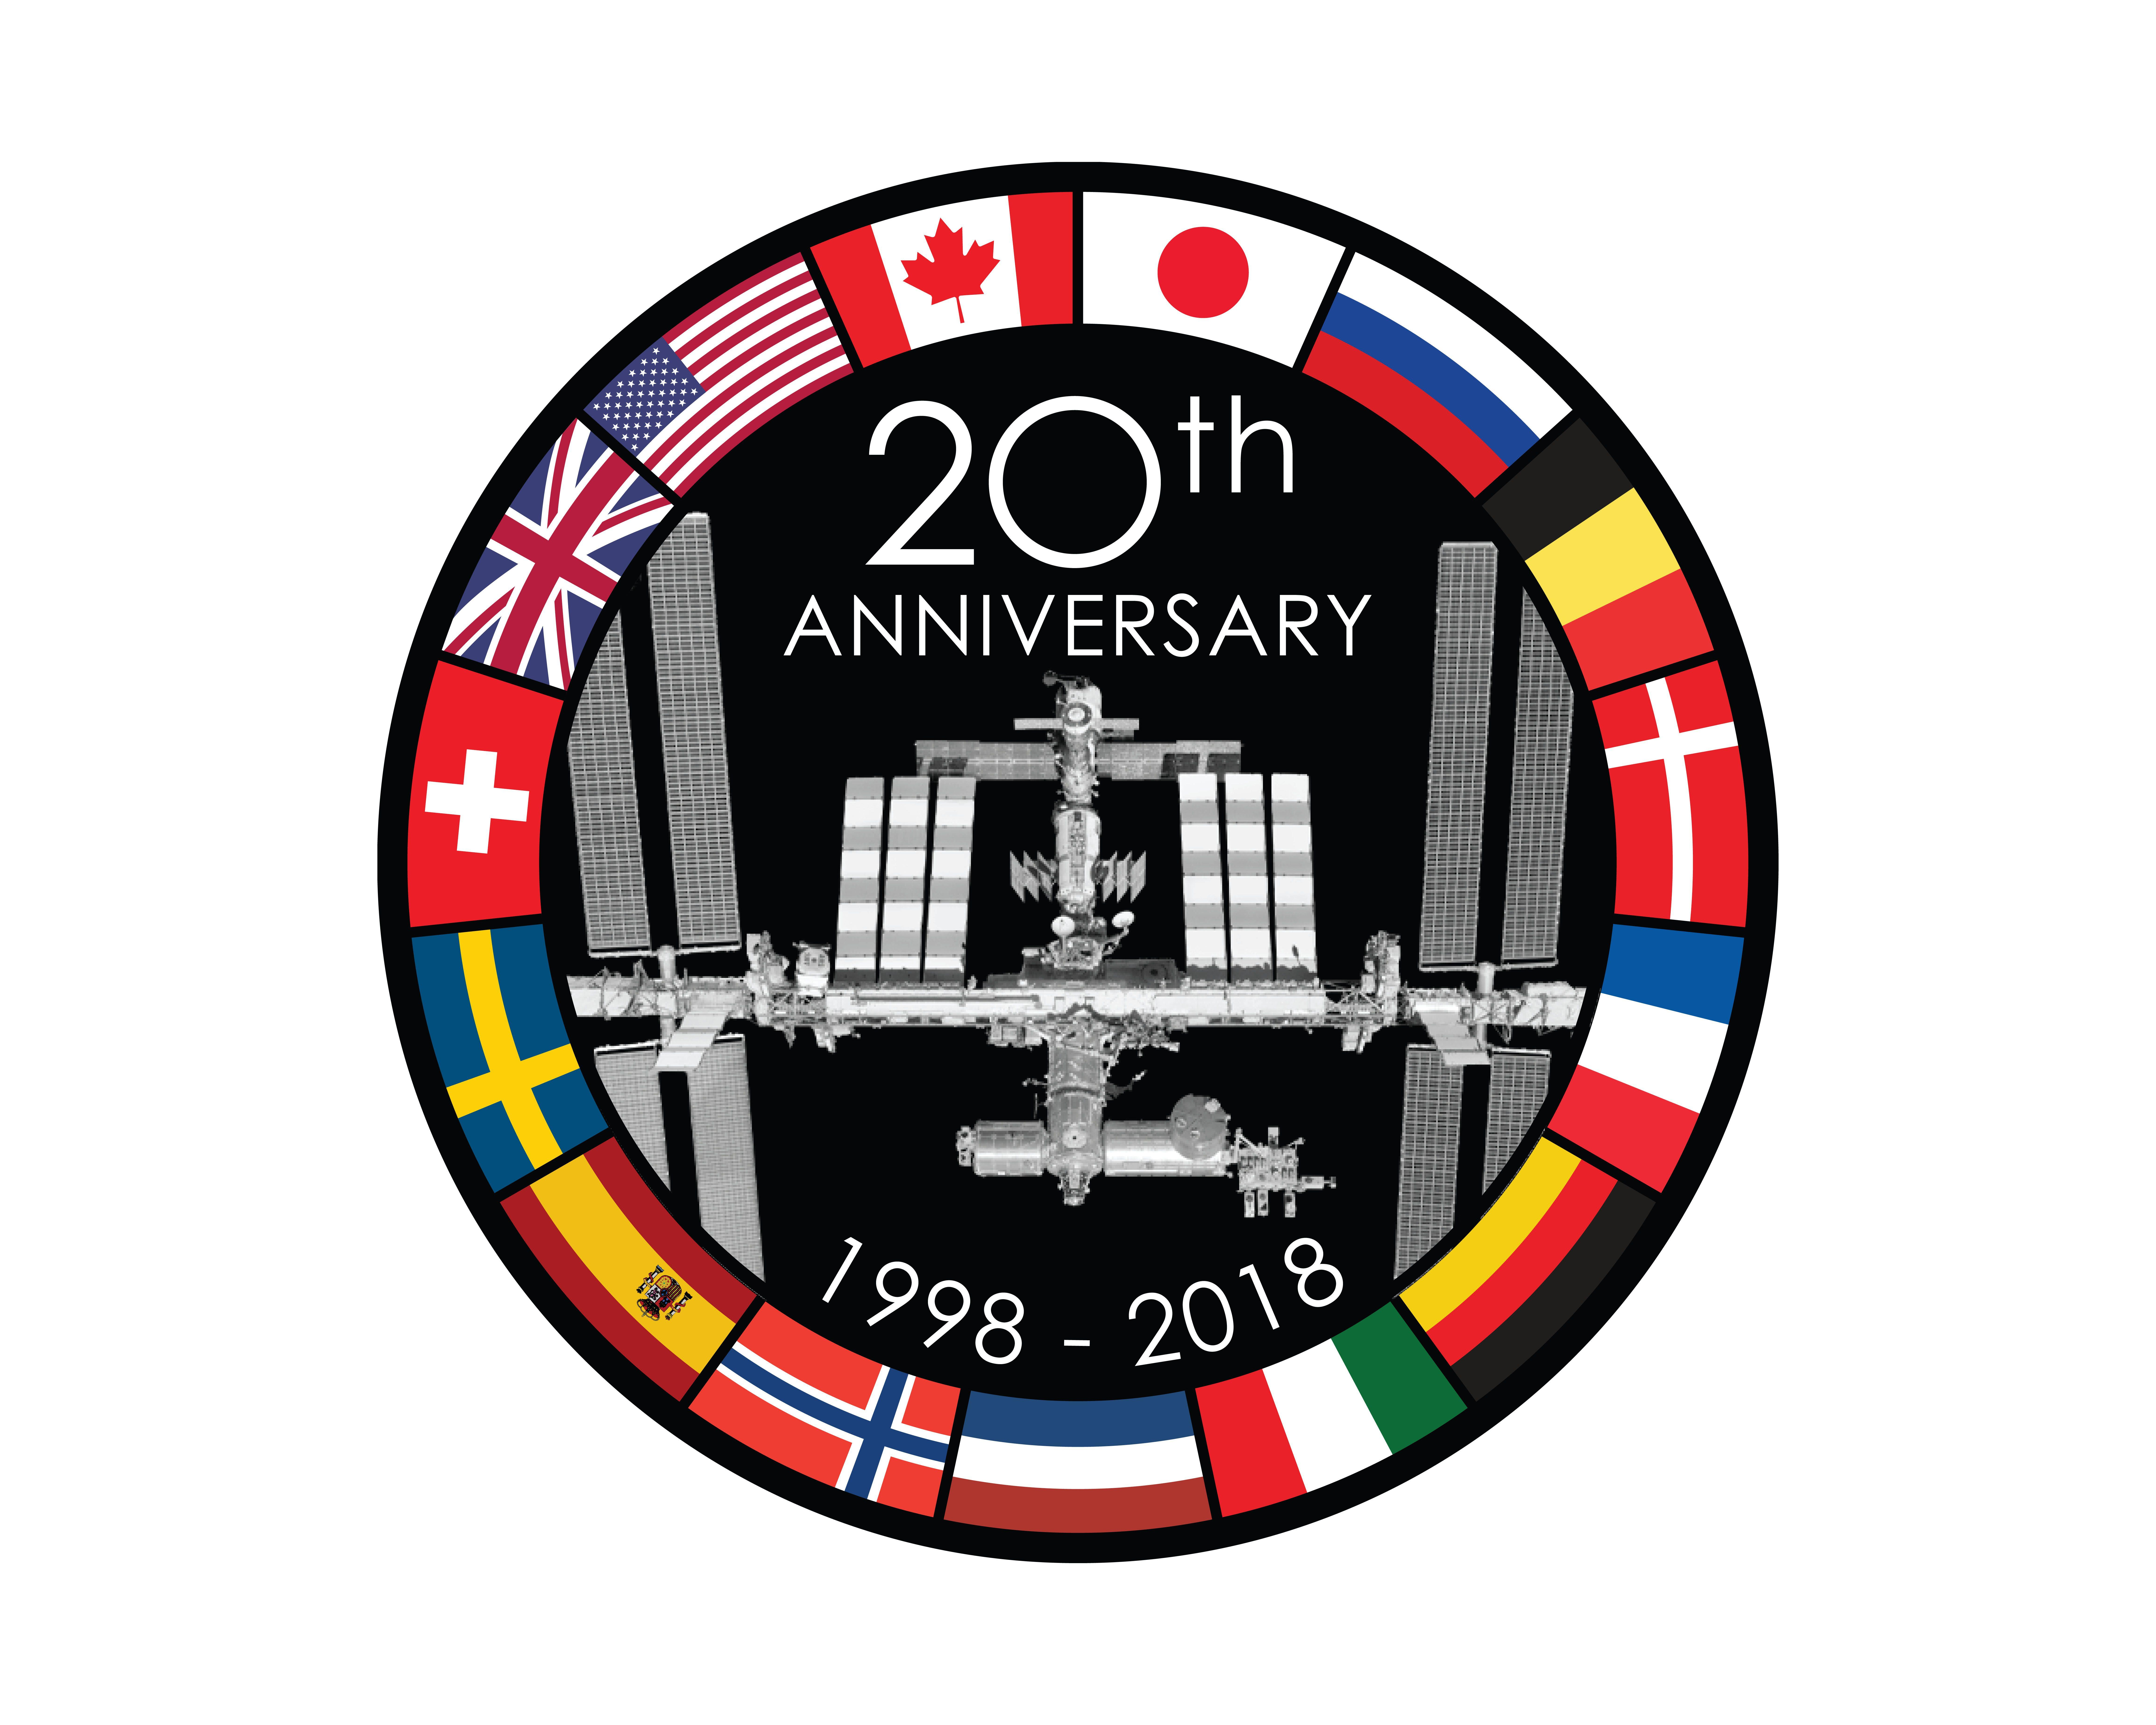 ISS Logo - The 20th anniversary logo of the International Space Station | NASA